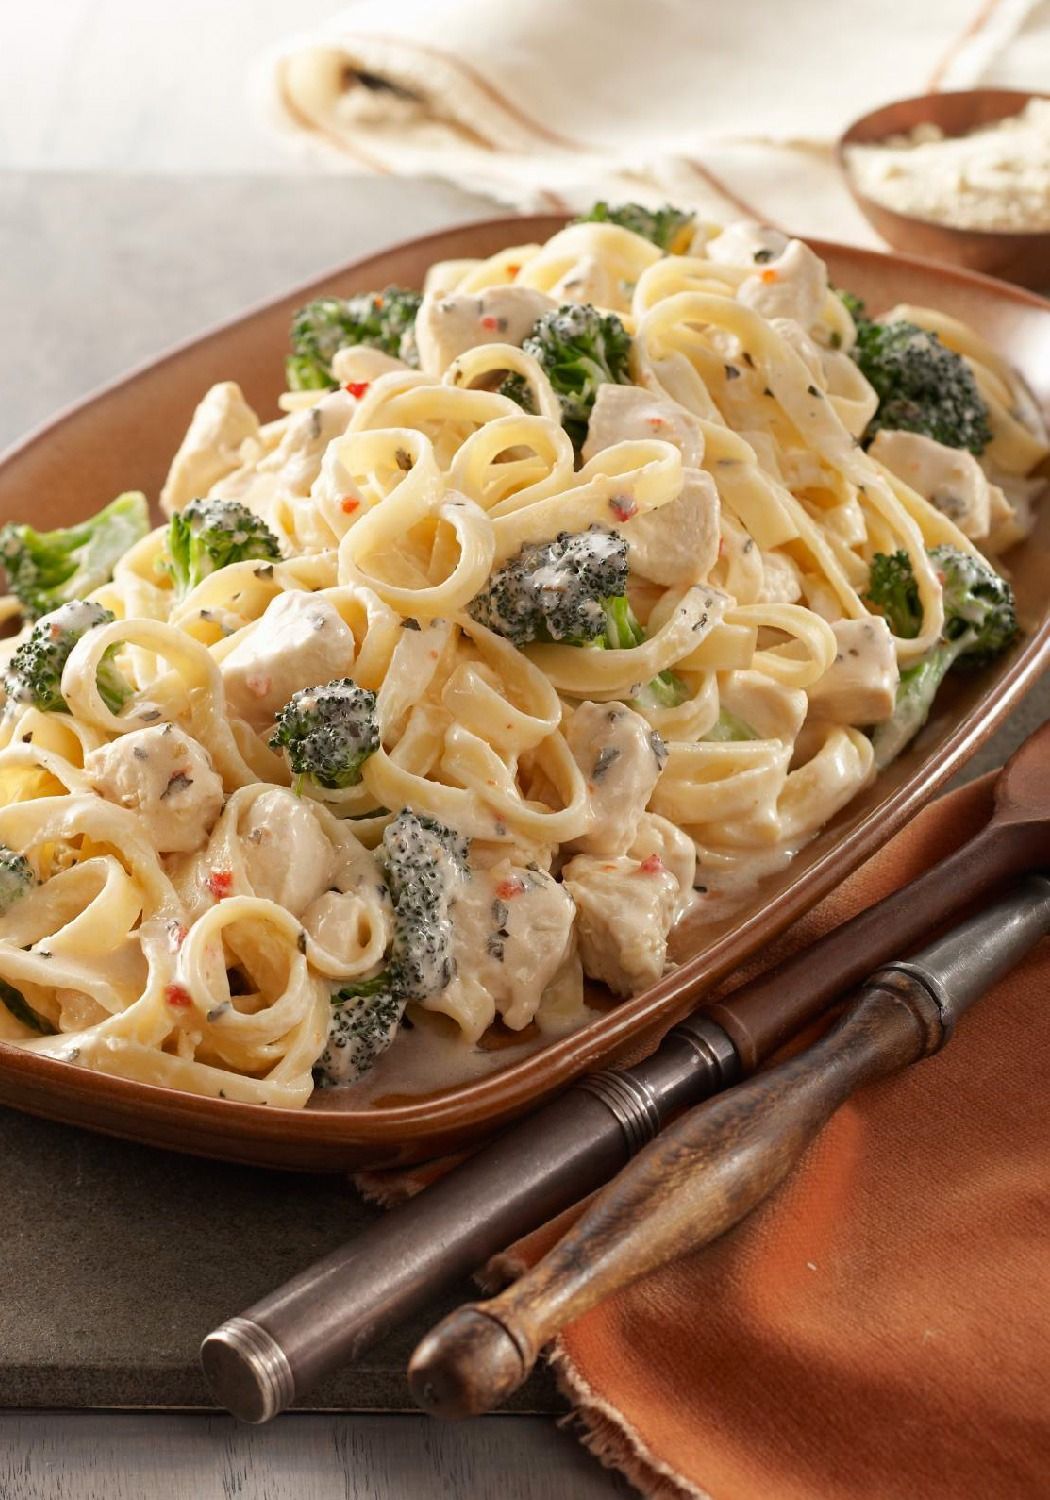 Easy Chicken & Broccoli Alfredo – Rich Alfredo may seem complicated to make, but it’s a snap when you know this shortcut. A